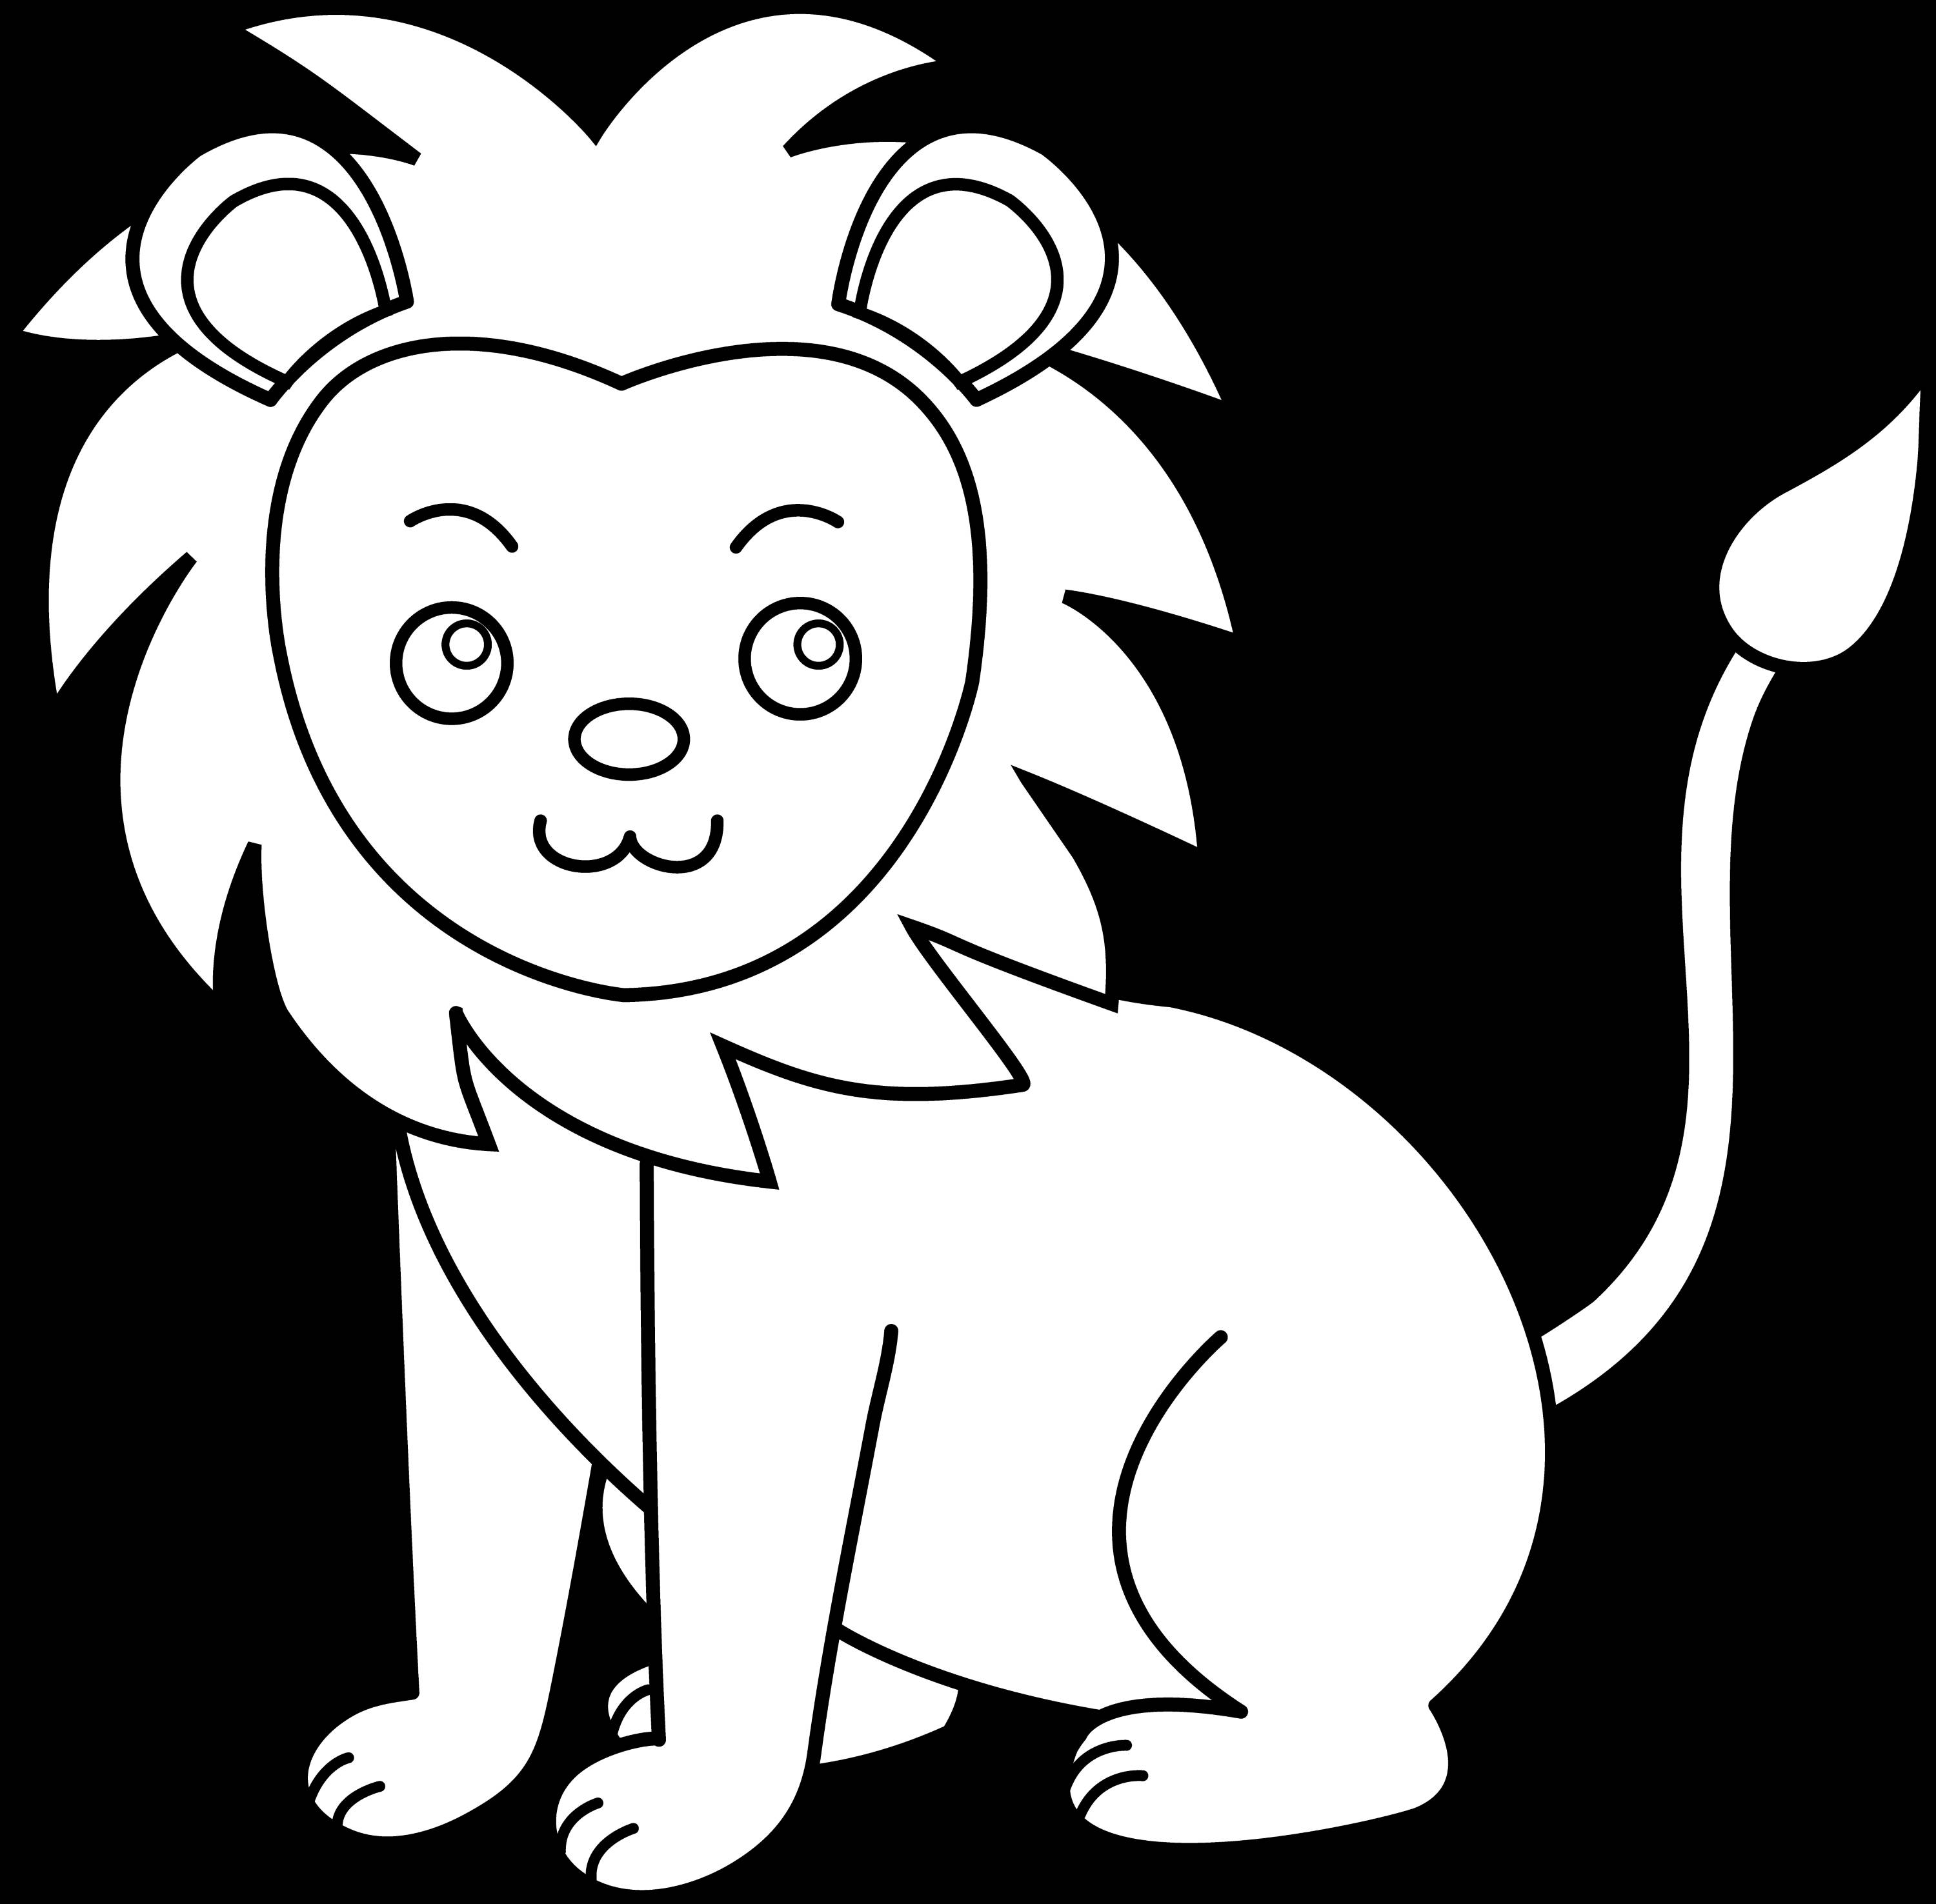 Amazing lion coloring pages for kids